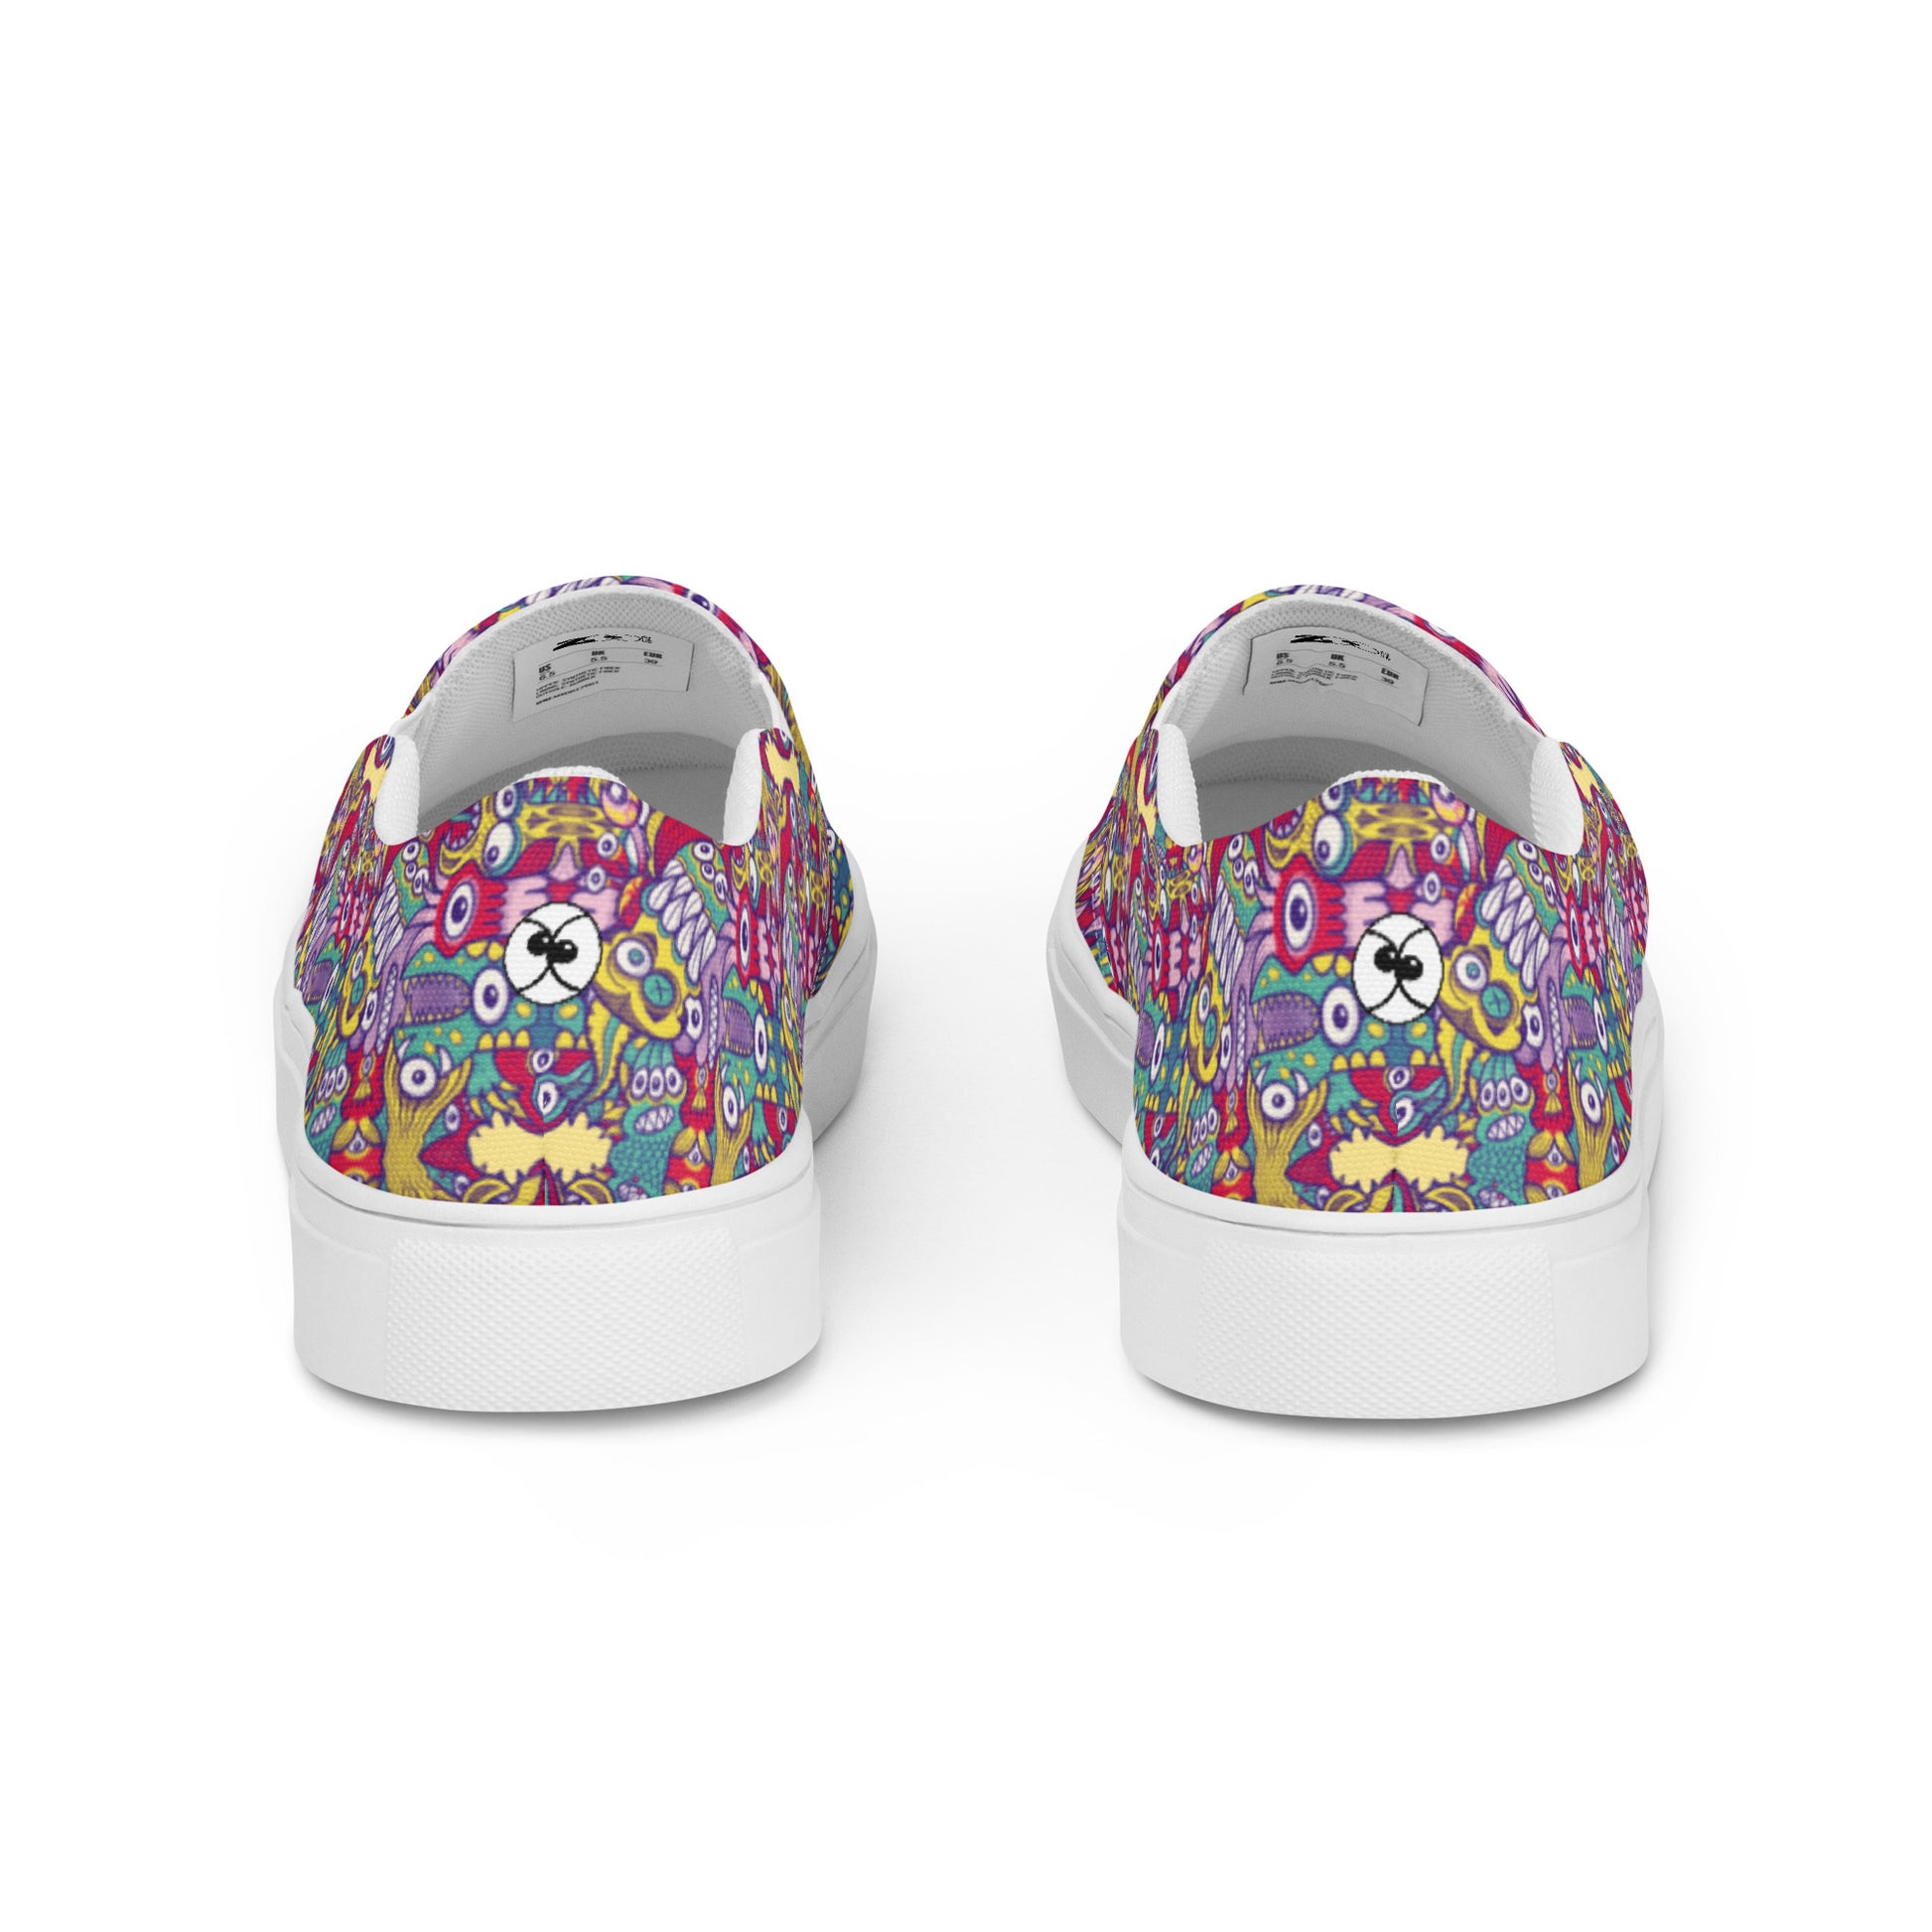 Exquisite corpse doodles in a pattern design Men’s slip-on canvas shoes. Back view